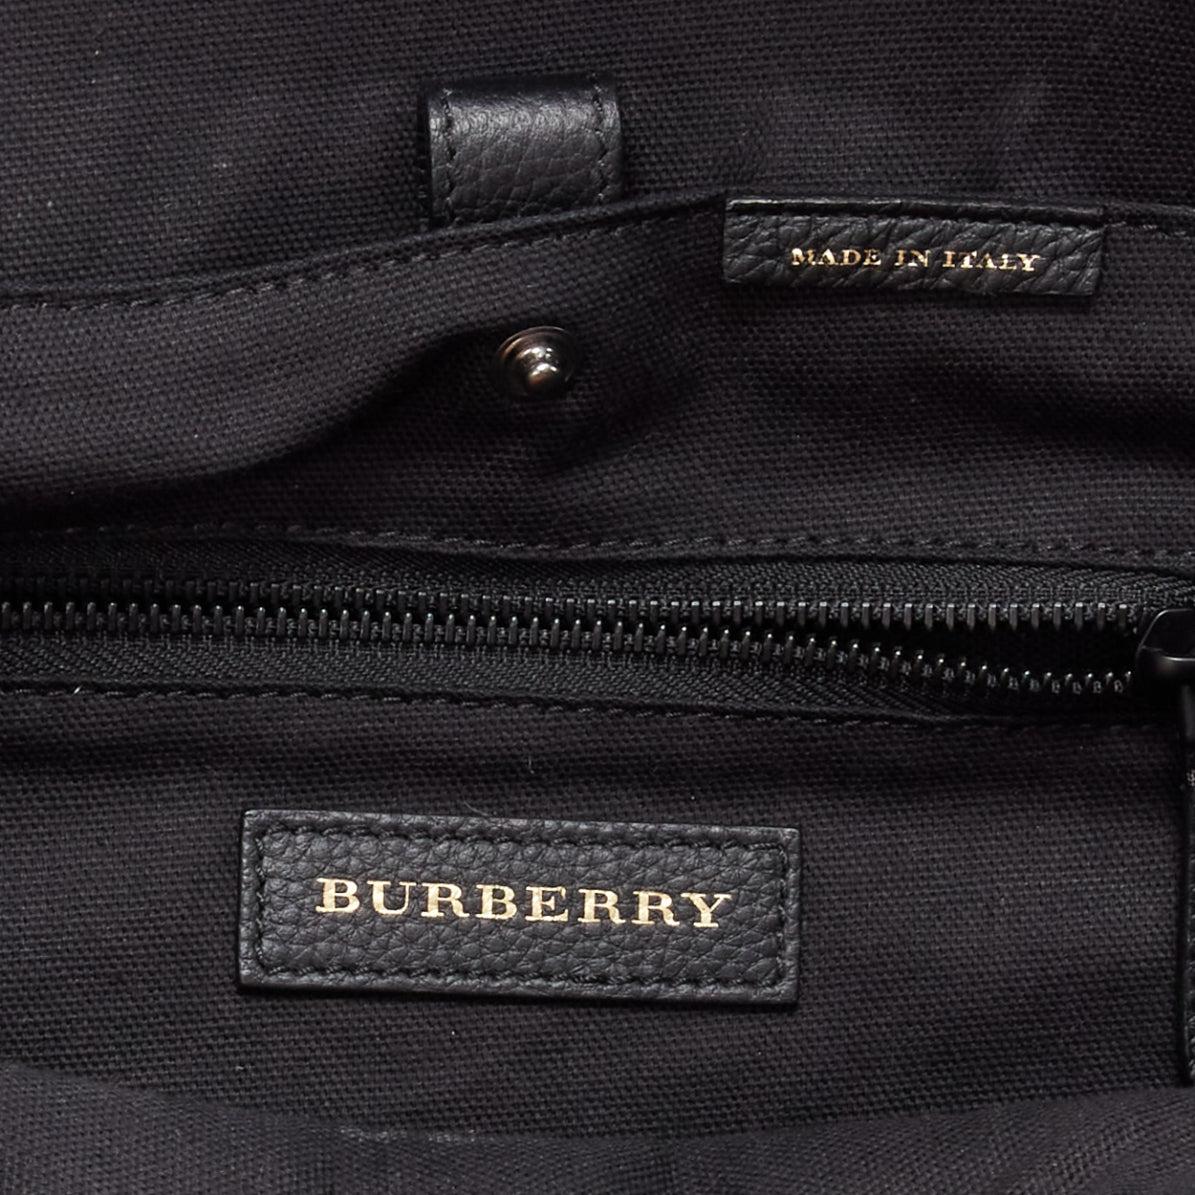 BURBERRY Donny House Check green black fabric leather trim backpack bag 4